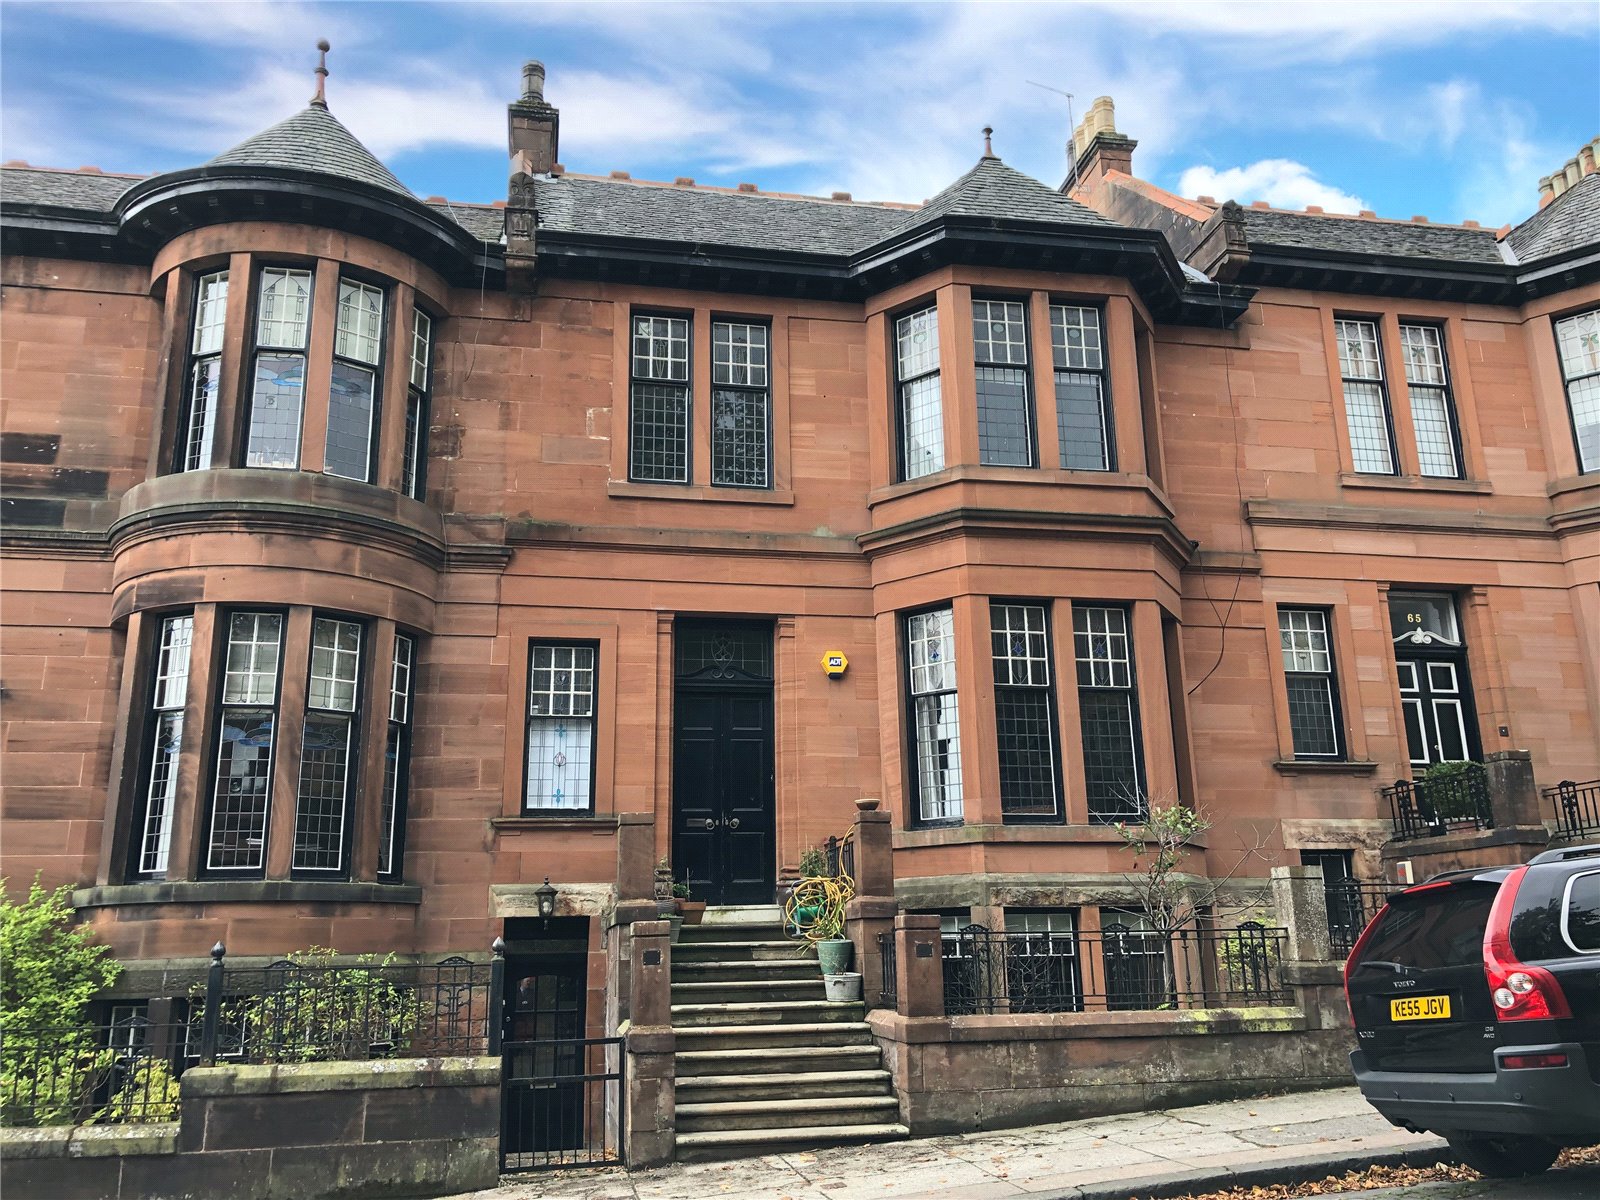 Our latest properties for sale and to let (13th September 2018)